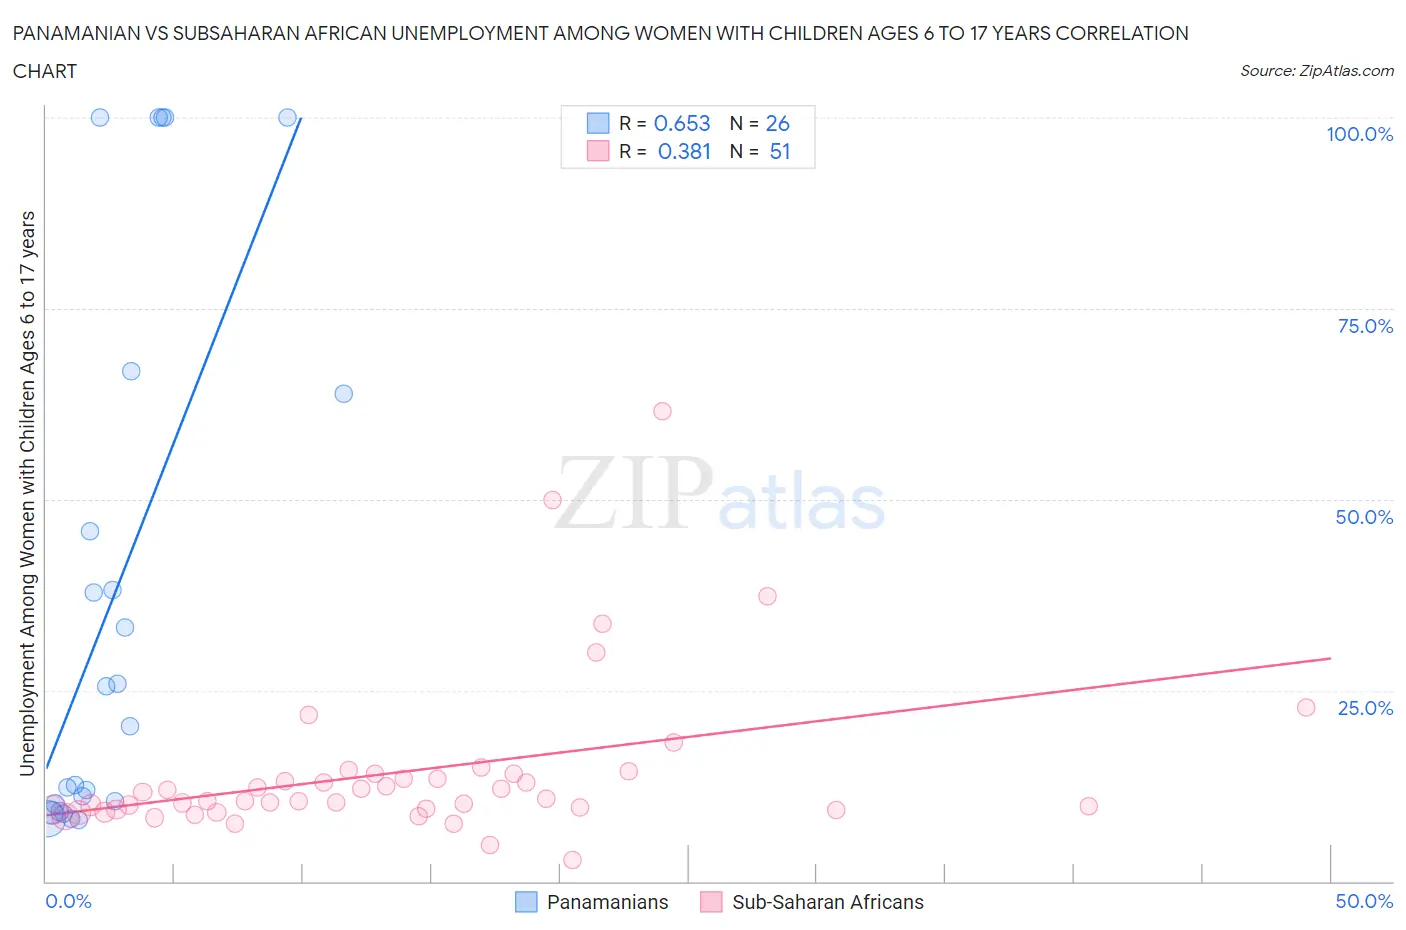 Panamanian vs Subsaharan African Unemployment Among Women with Children Ages 6 to 17 years